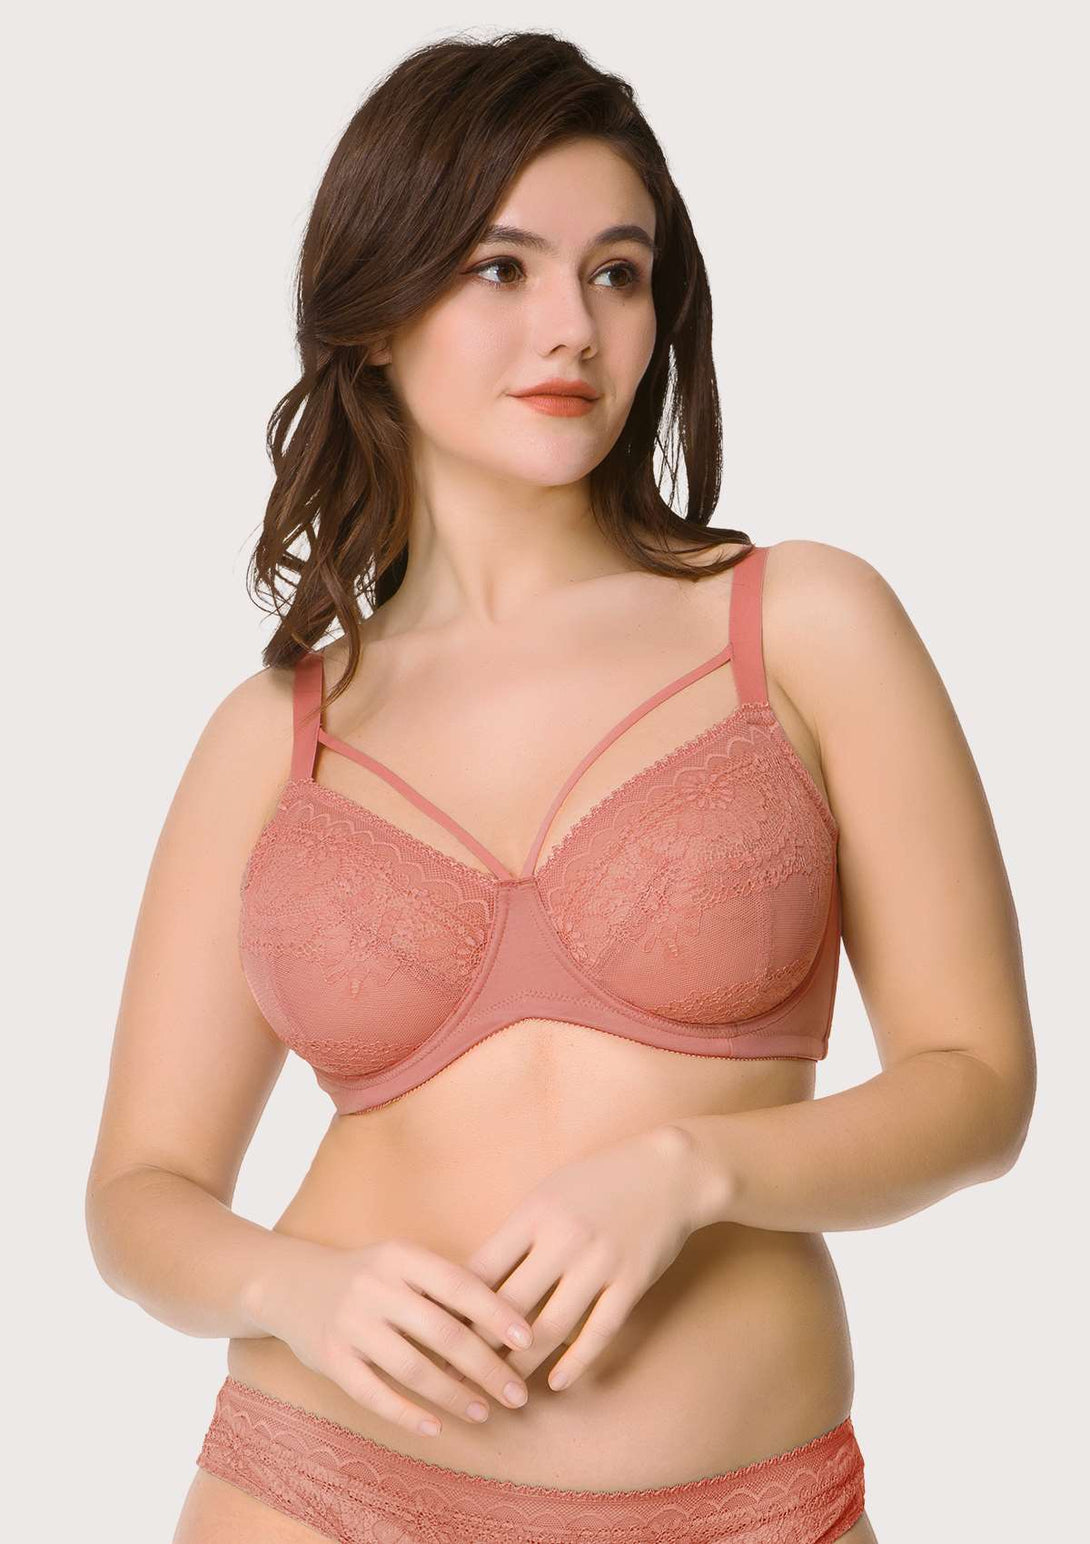 HSIA Pretty In Petals Unlined Lace Mesh Bra and Panty set for Full Figure